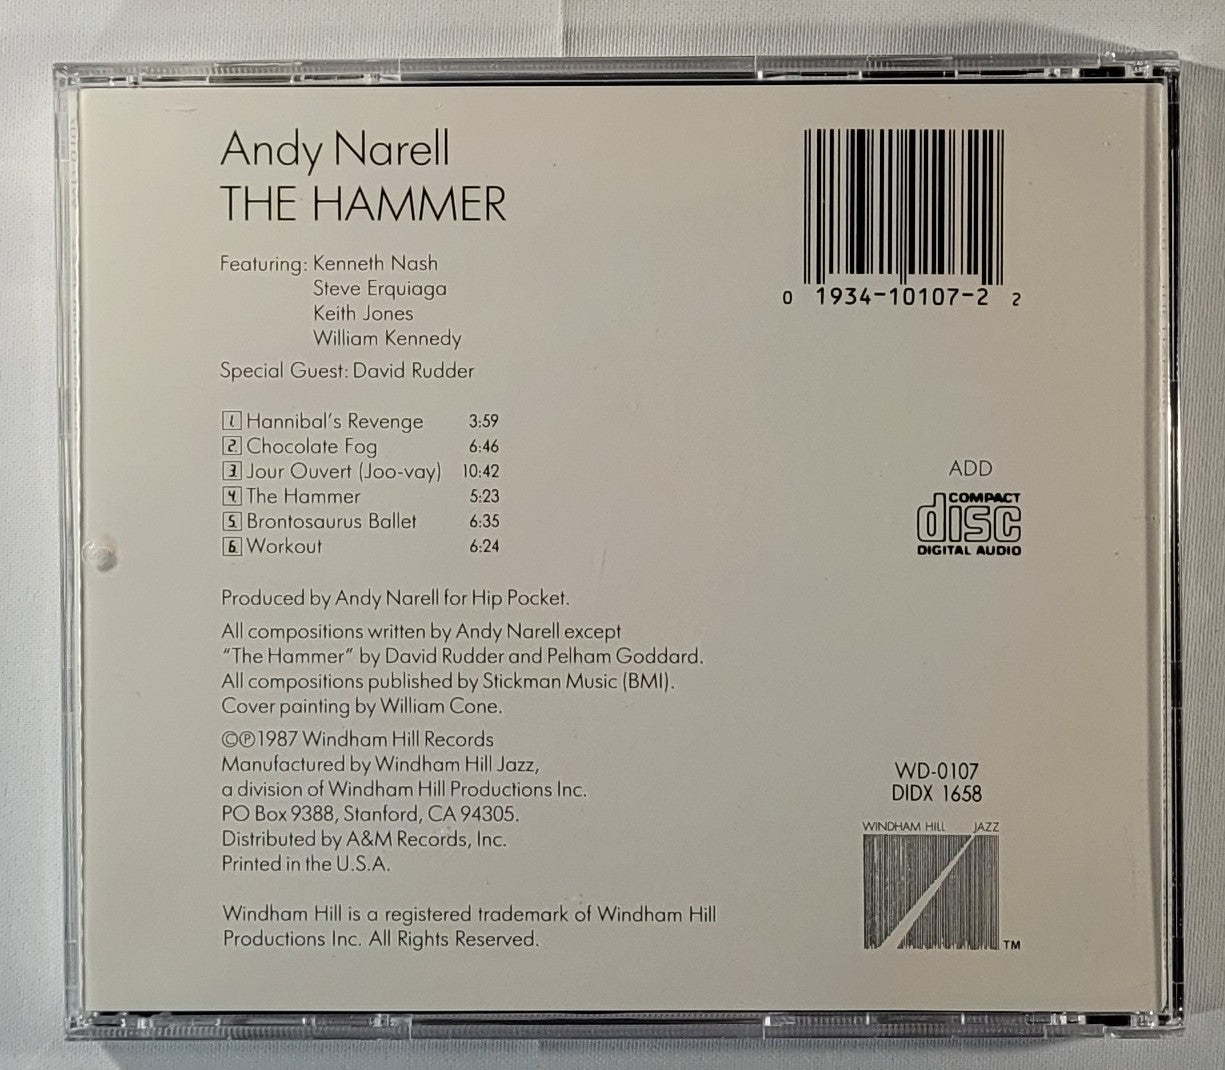 Andy Narell - The Hammer [1987 Used CD]